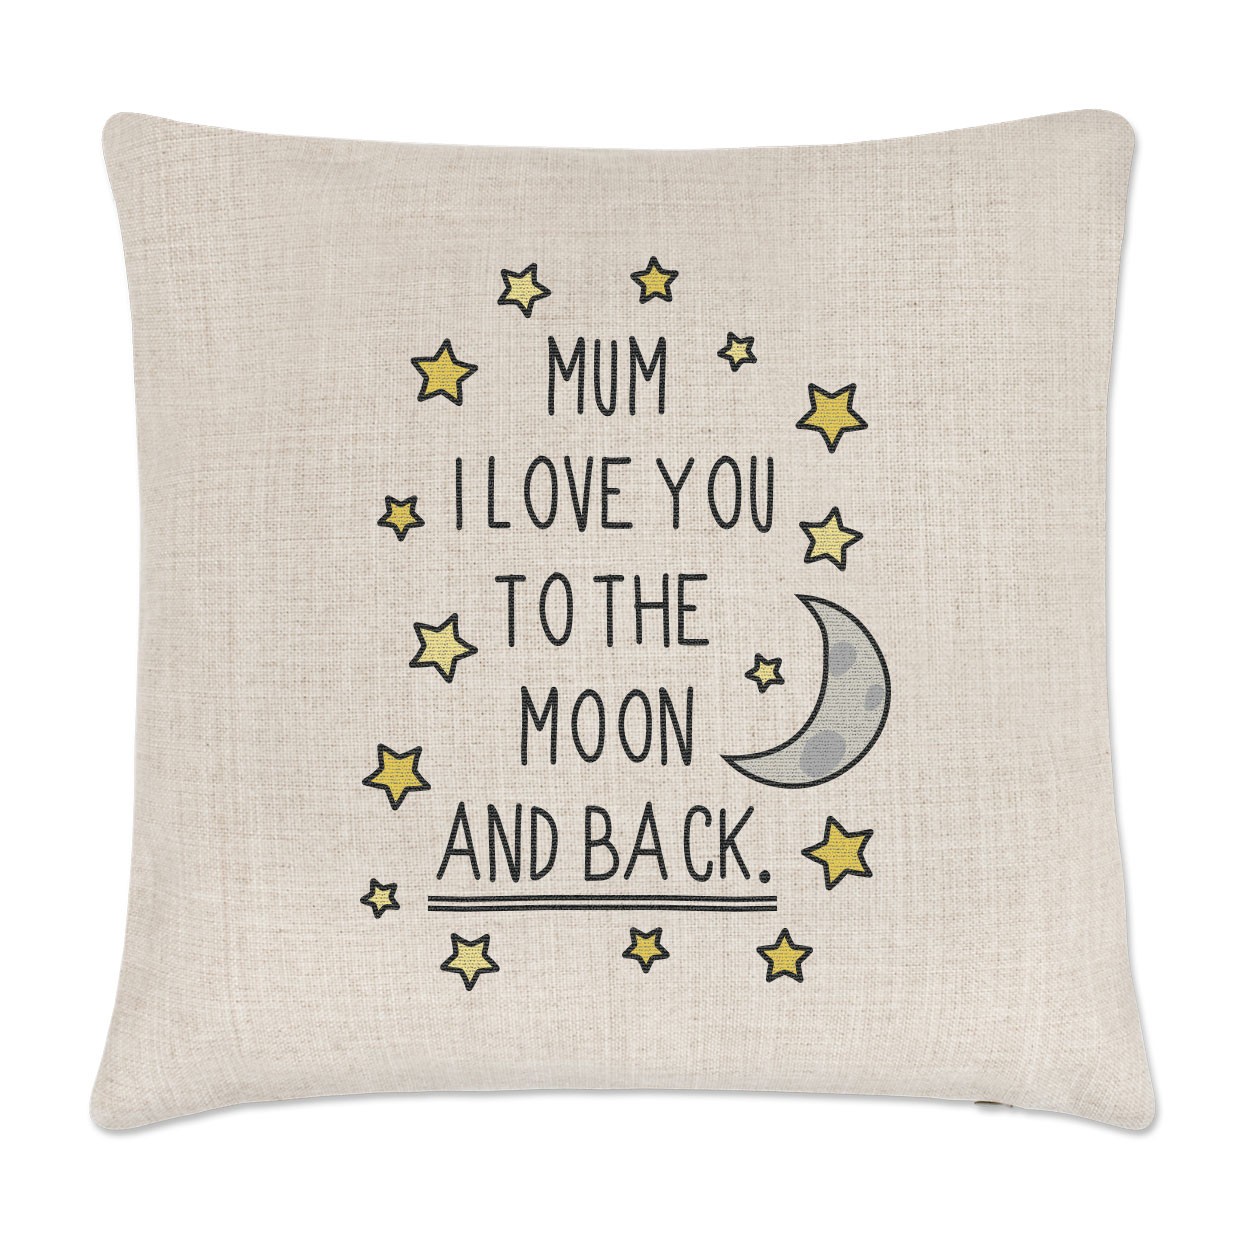 Mum I Love You To The Moon And Back Linen Cushion Cover